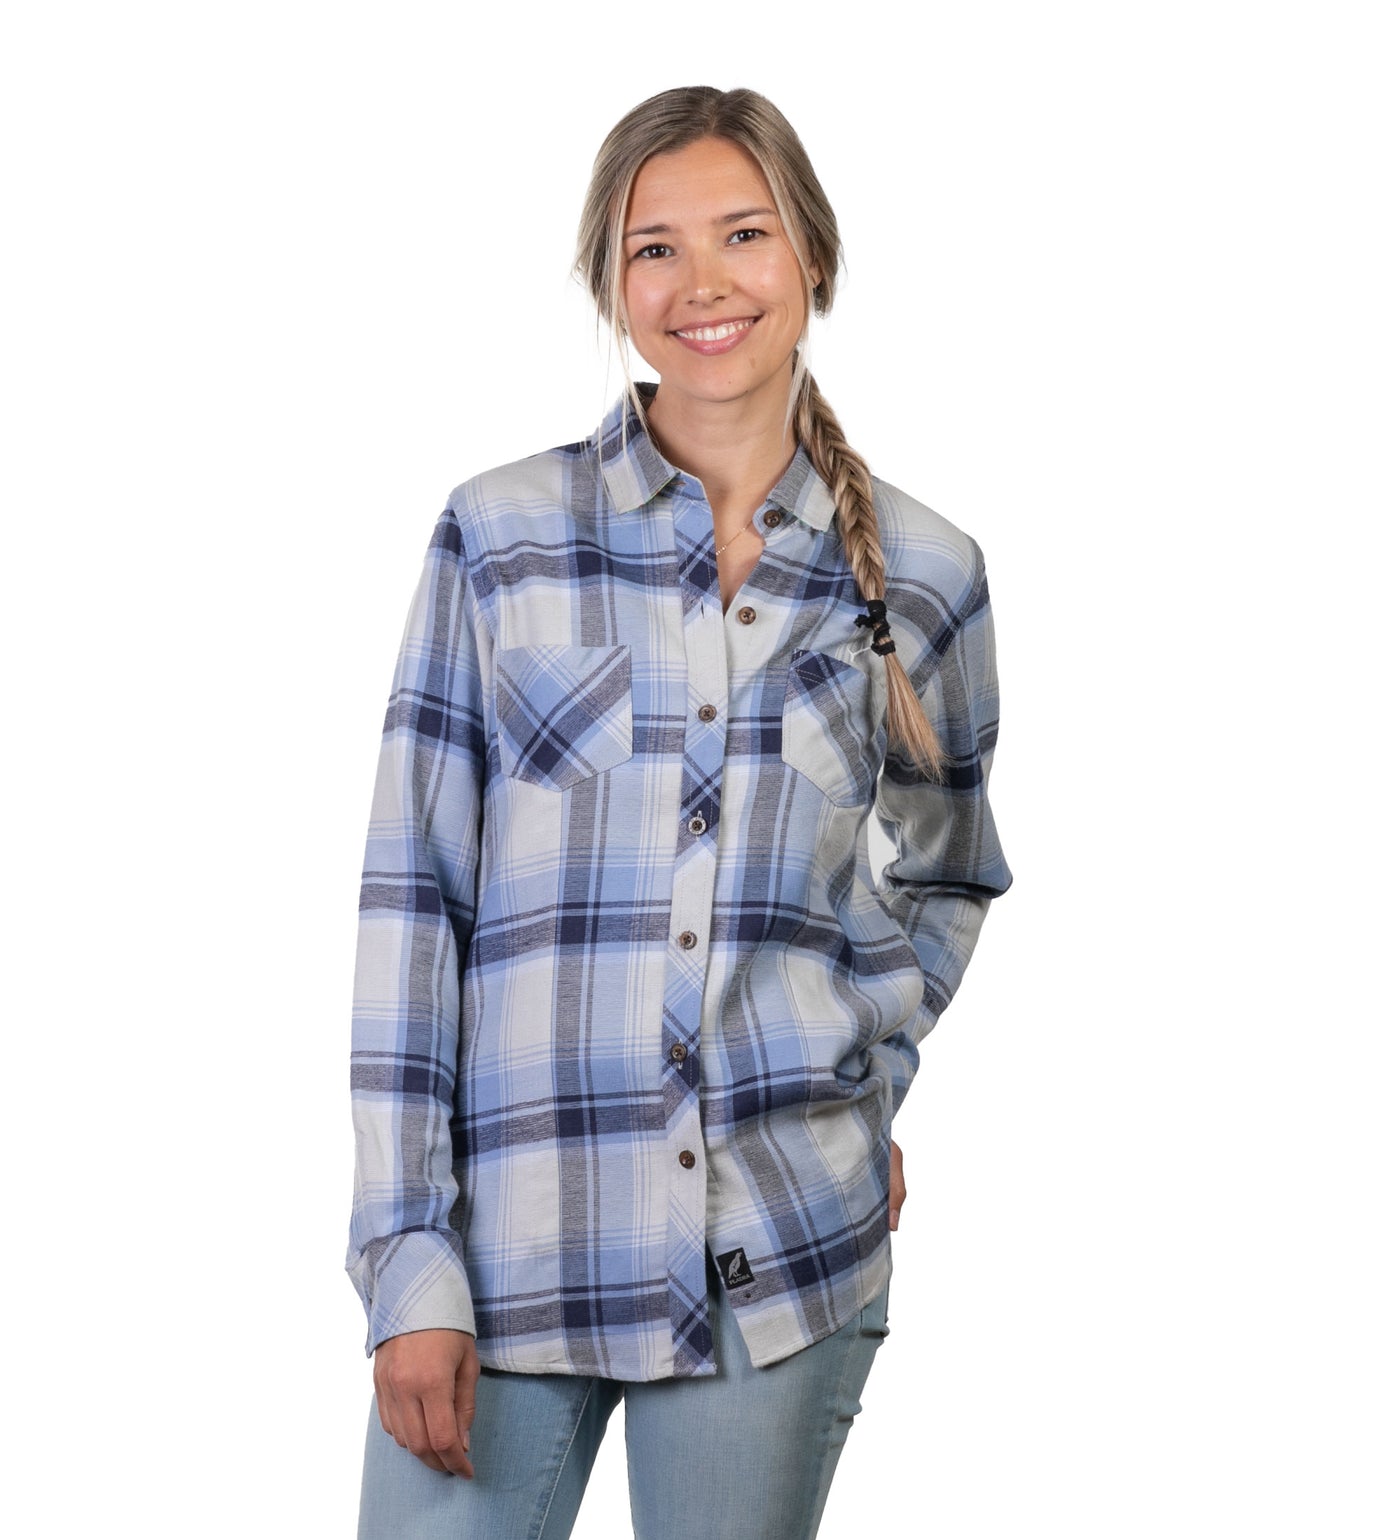 Women's Peregrine Every Day Double Weave Shirt- Birch White